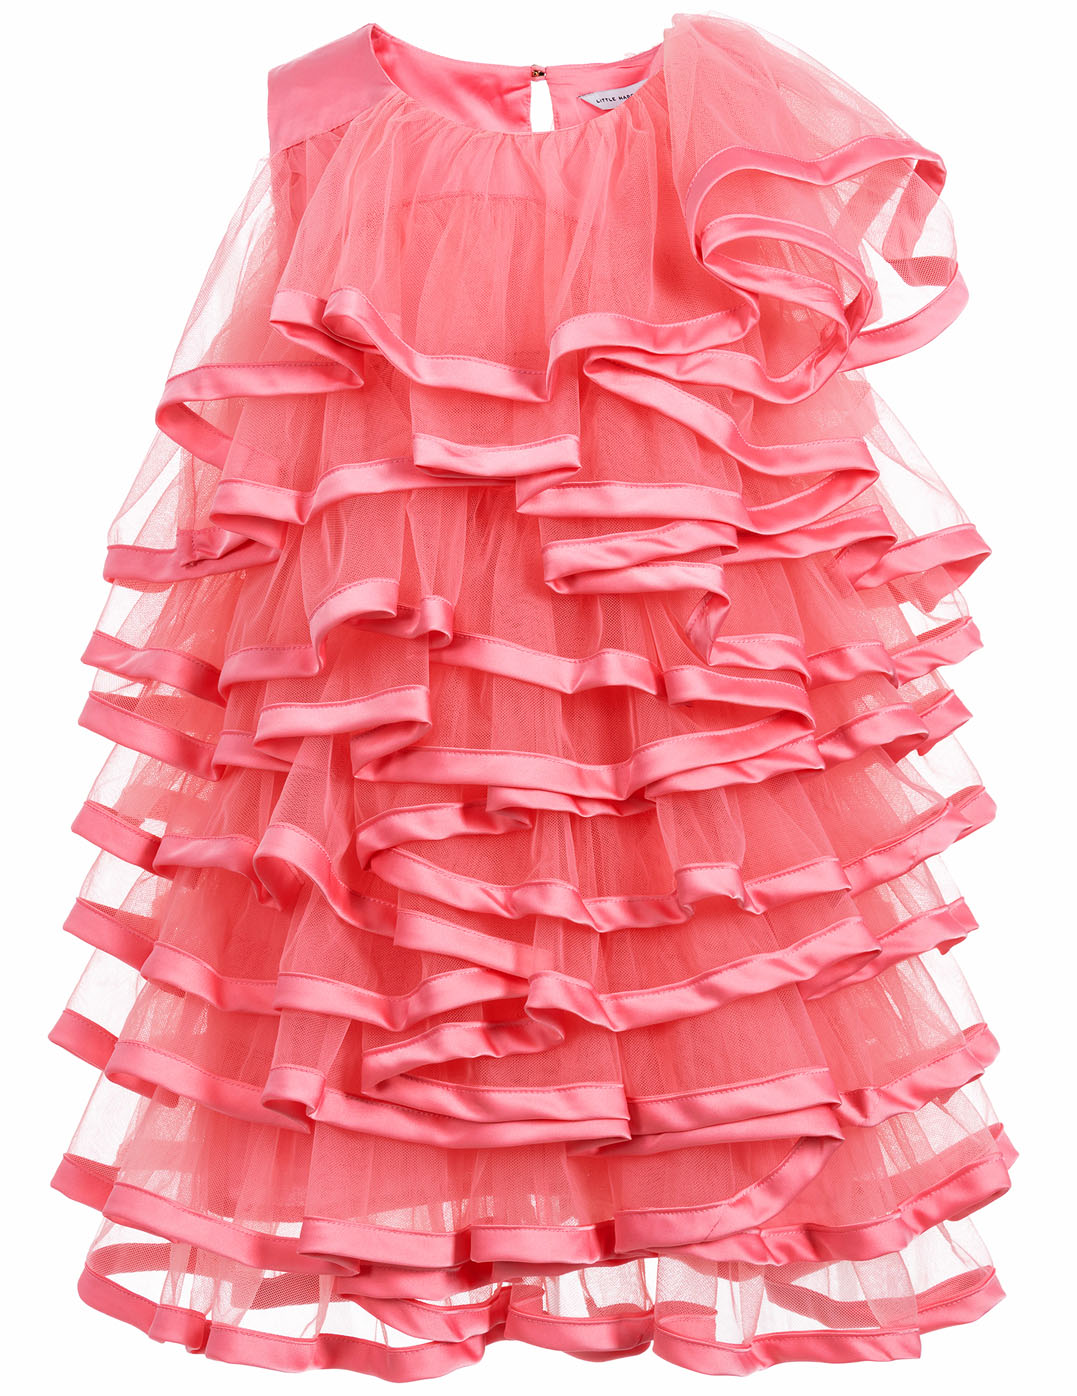 Must Have of the Day: LITTLE MARC JACOBS Pink Tulle Dress